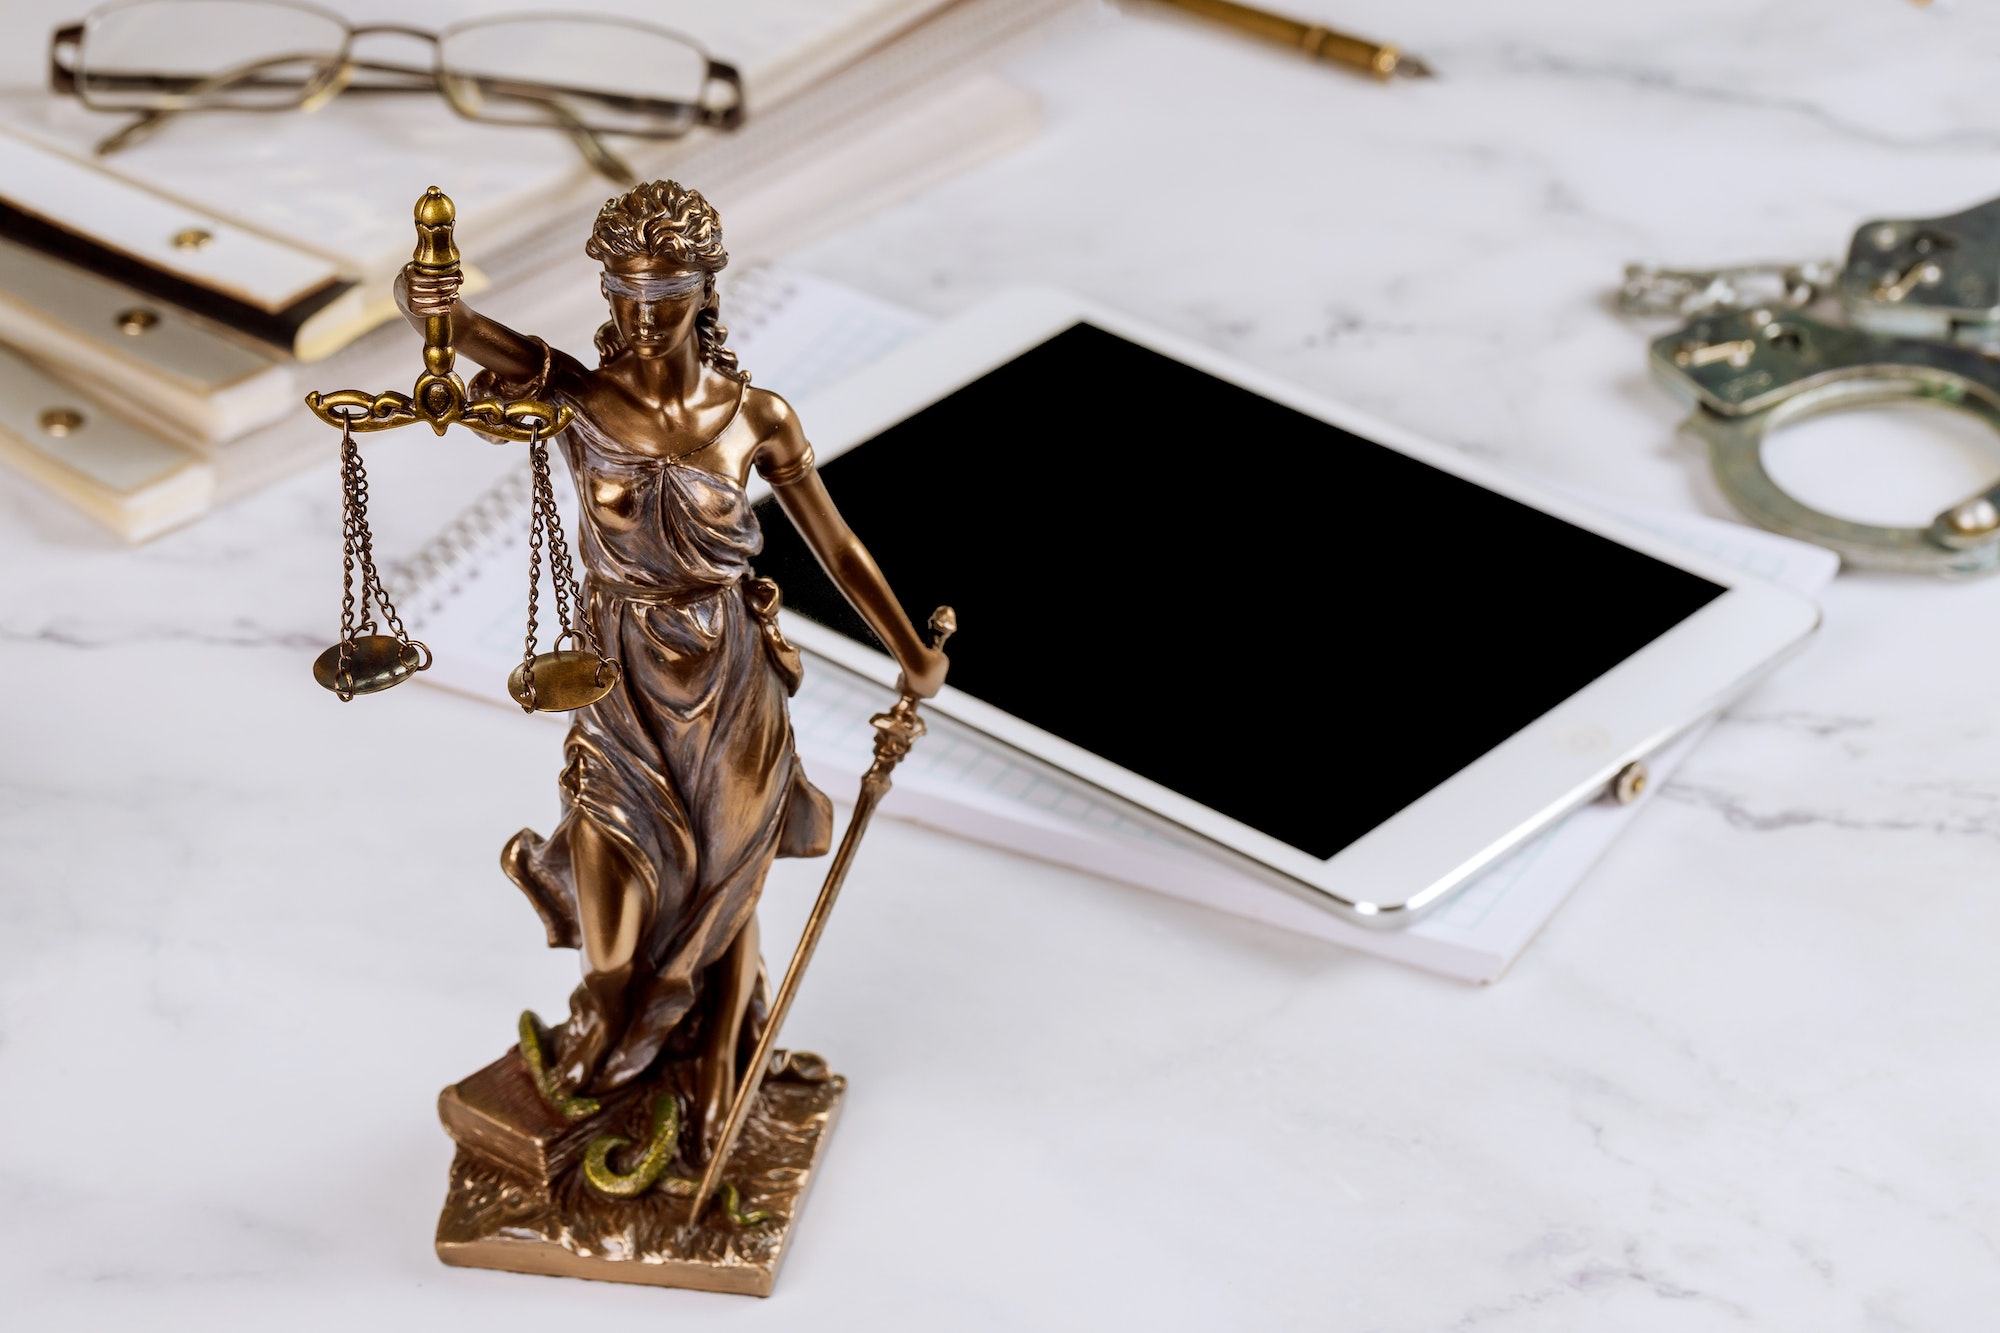 Lawyer Statue of Justice with scales lawyers symbols office working on a digital tablet